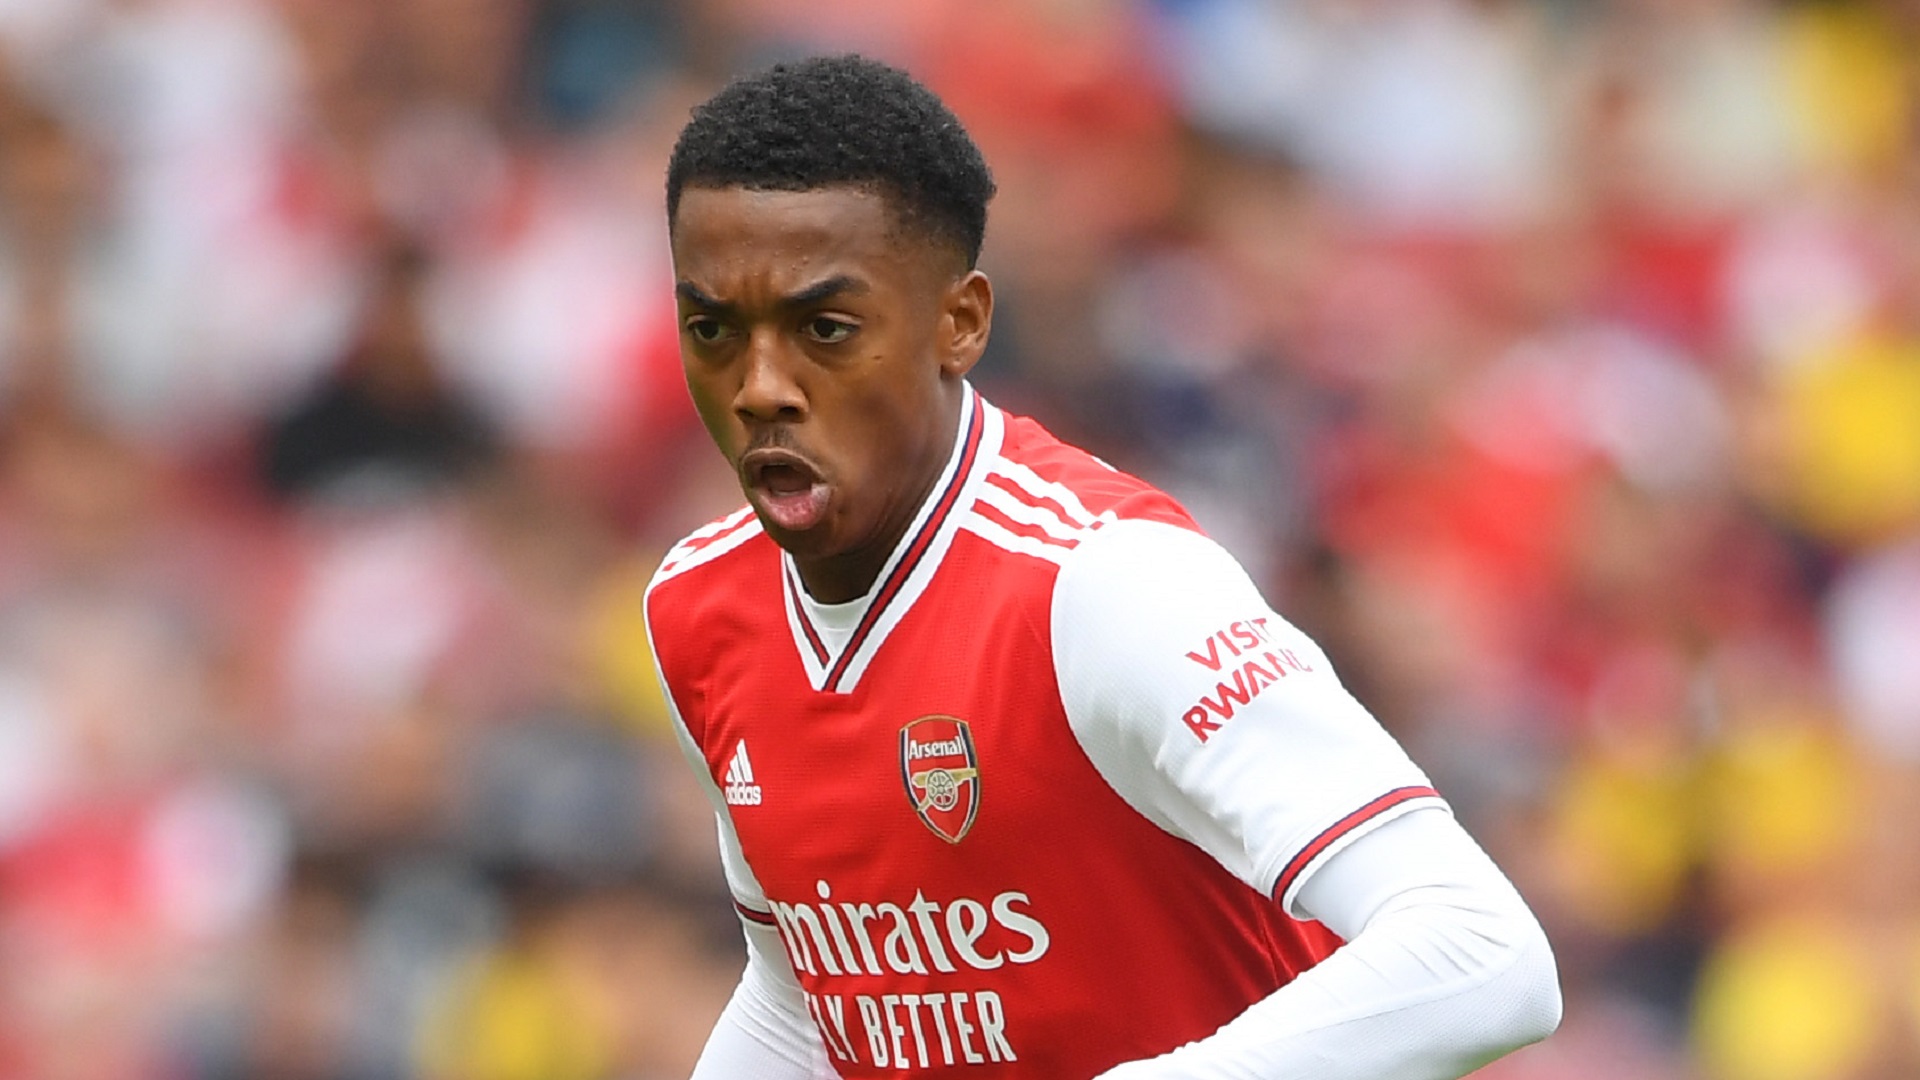 Arsenal starlet Willock reveals key lesson he learned from Wenger